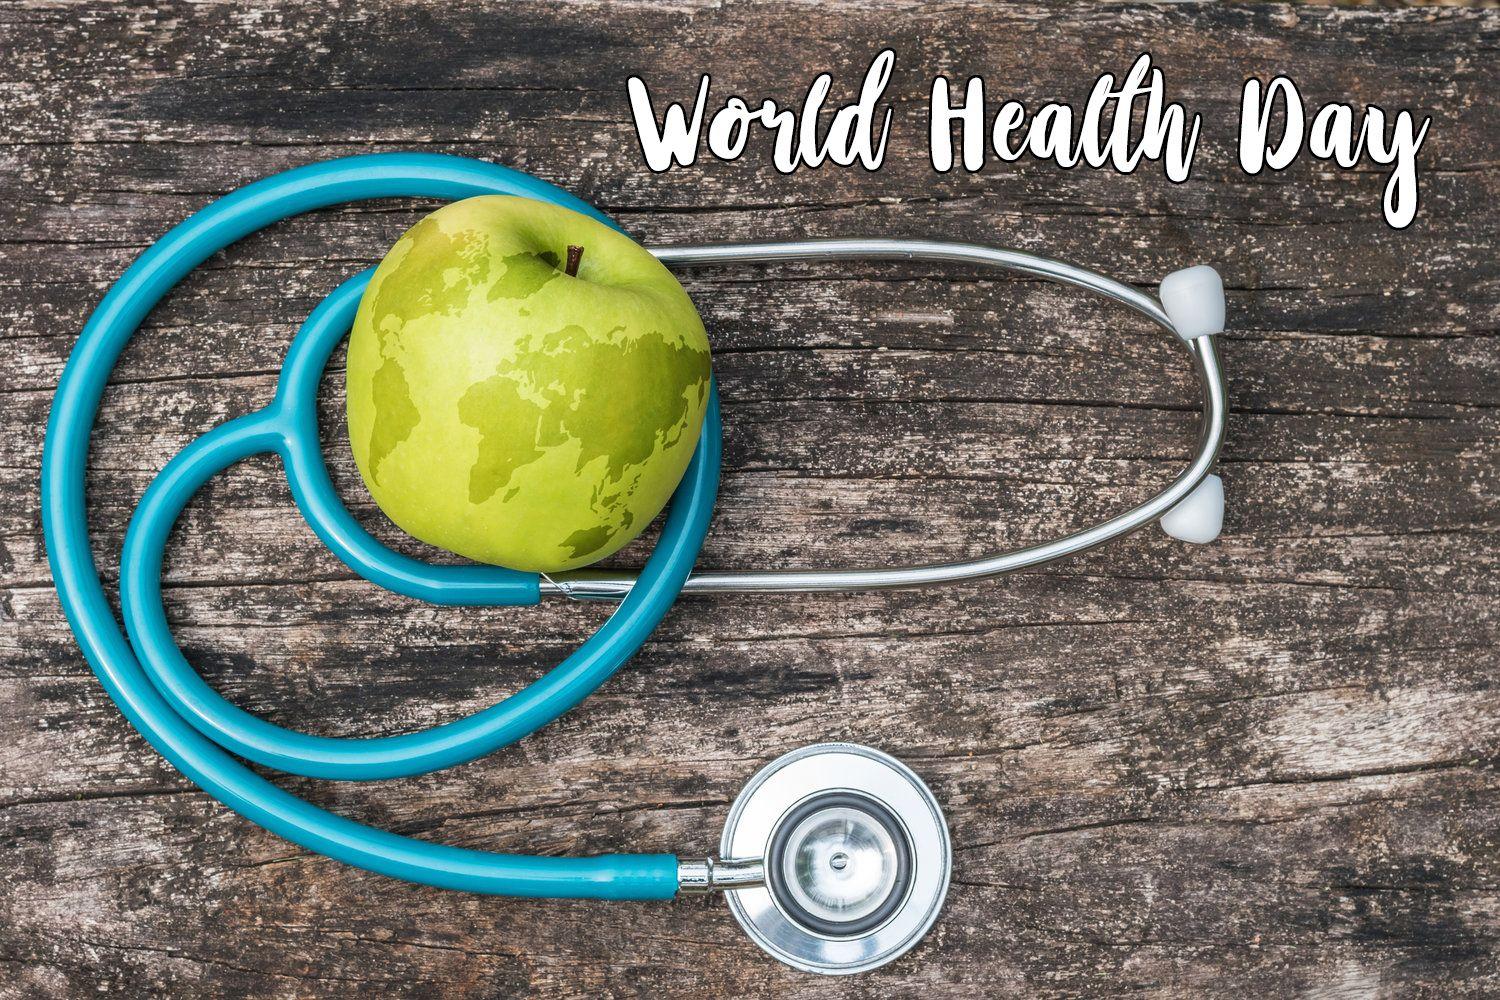 World Health Day Wallpaper Free Download